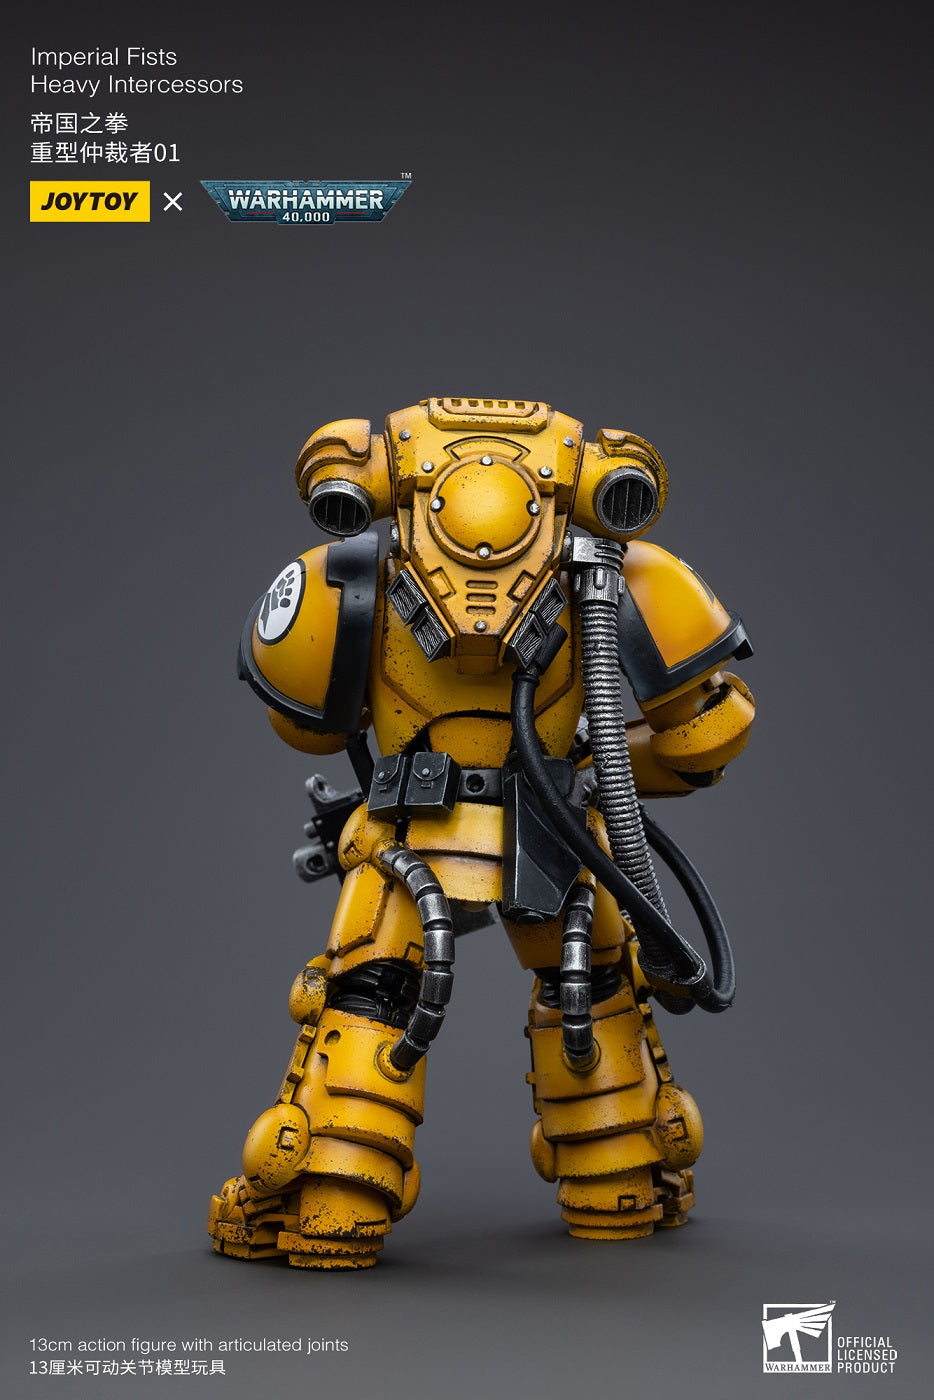 Imperial Fists Heavy Intercessors 01 - Warhammer 40K Action Figure By JOYTOY